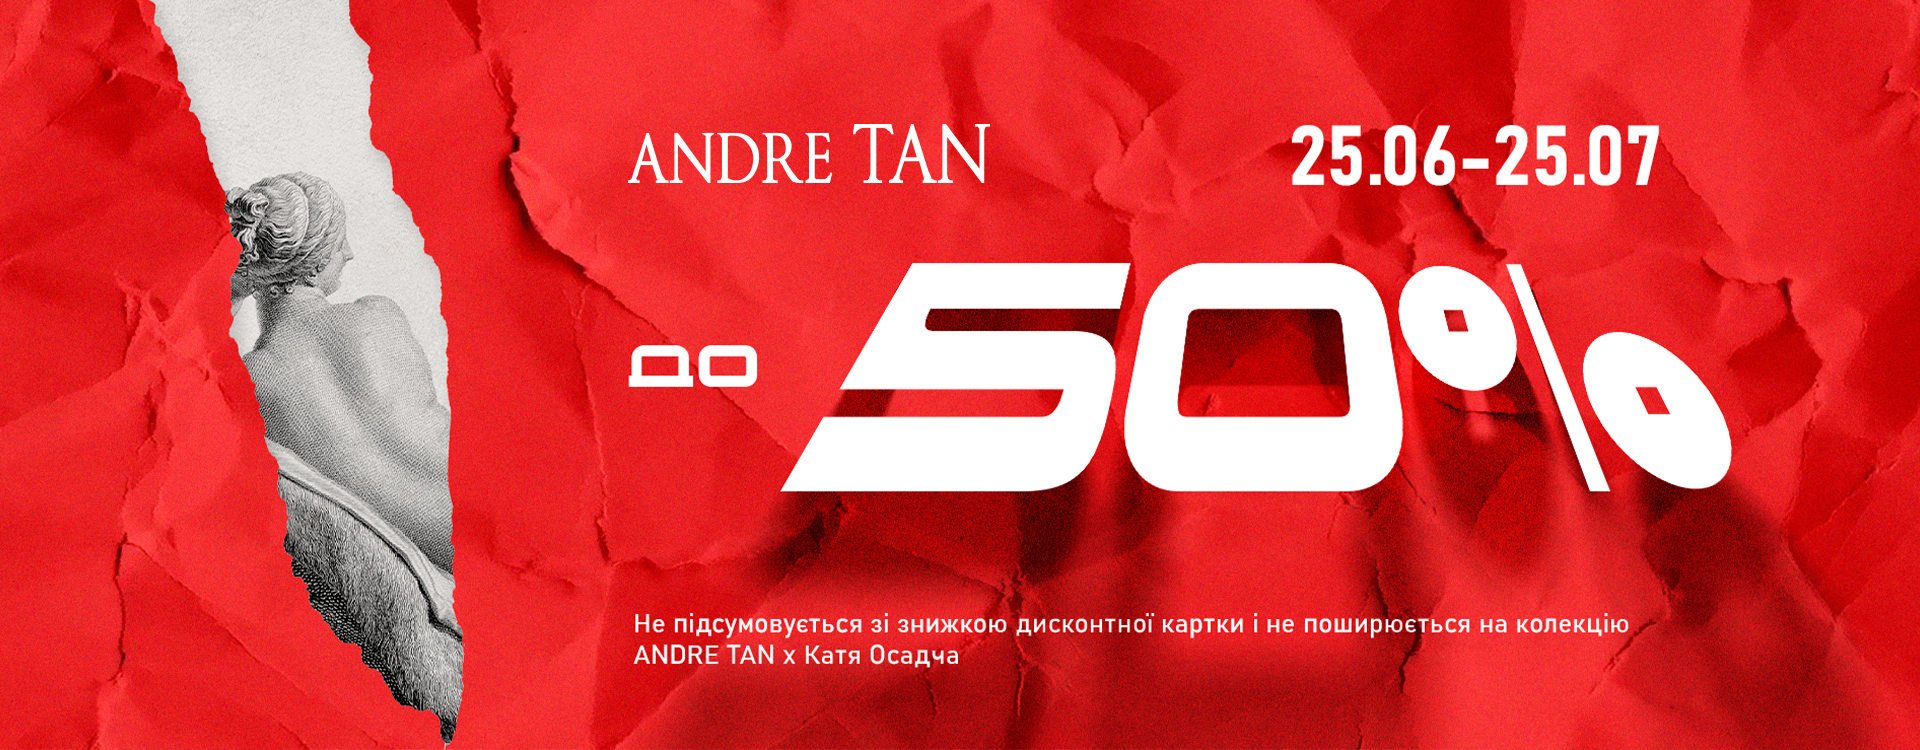 Discounts up to -50%
from ANDRE TAN!